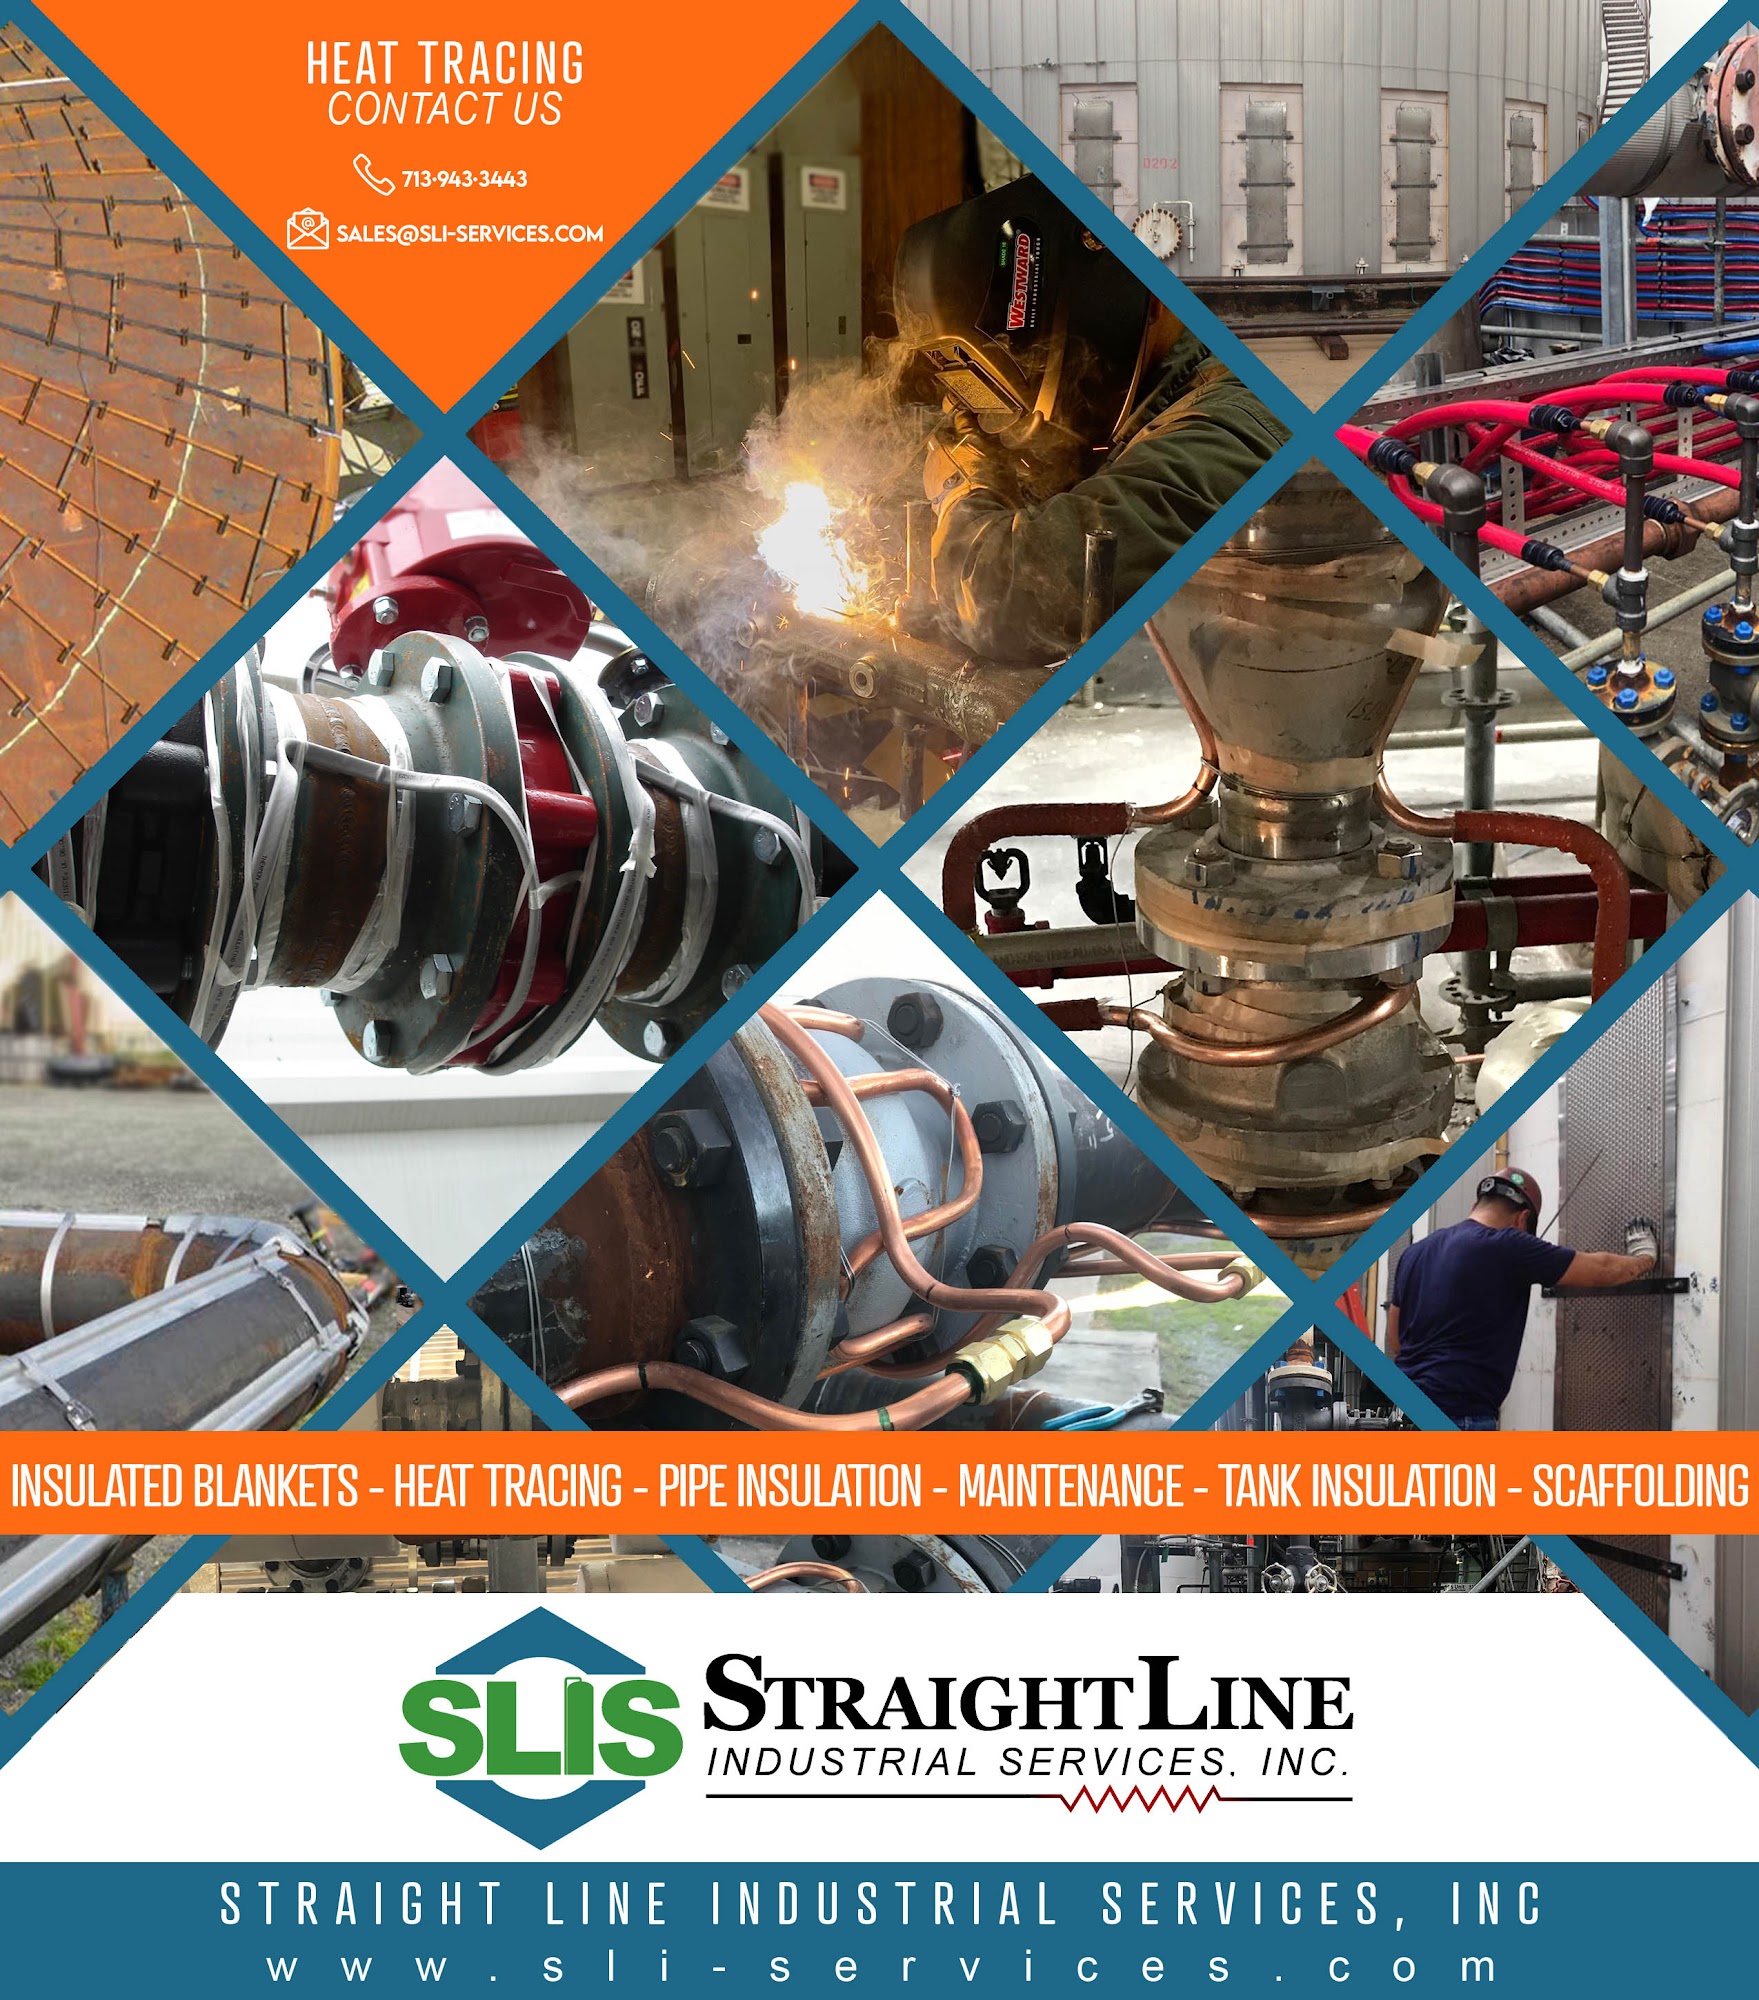 Straight Line Industrial Services, Inc. 1101 Michigan St, South Houston Texas 77587